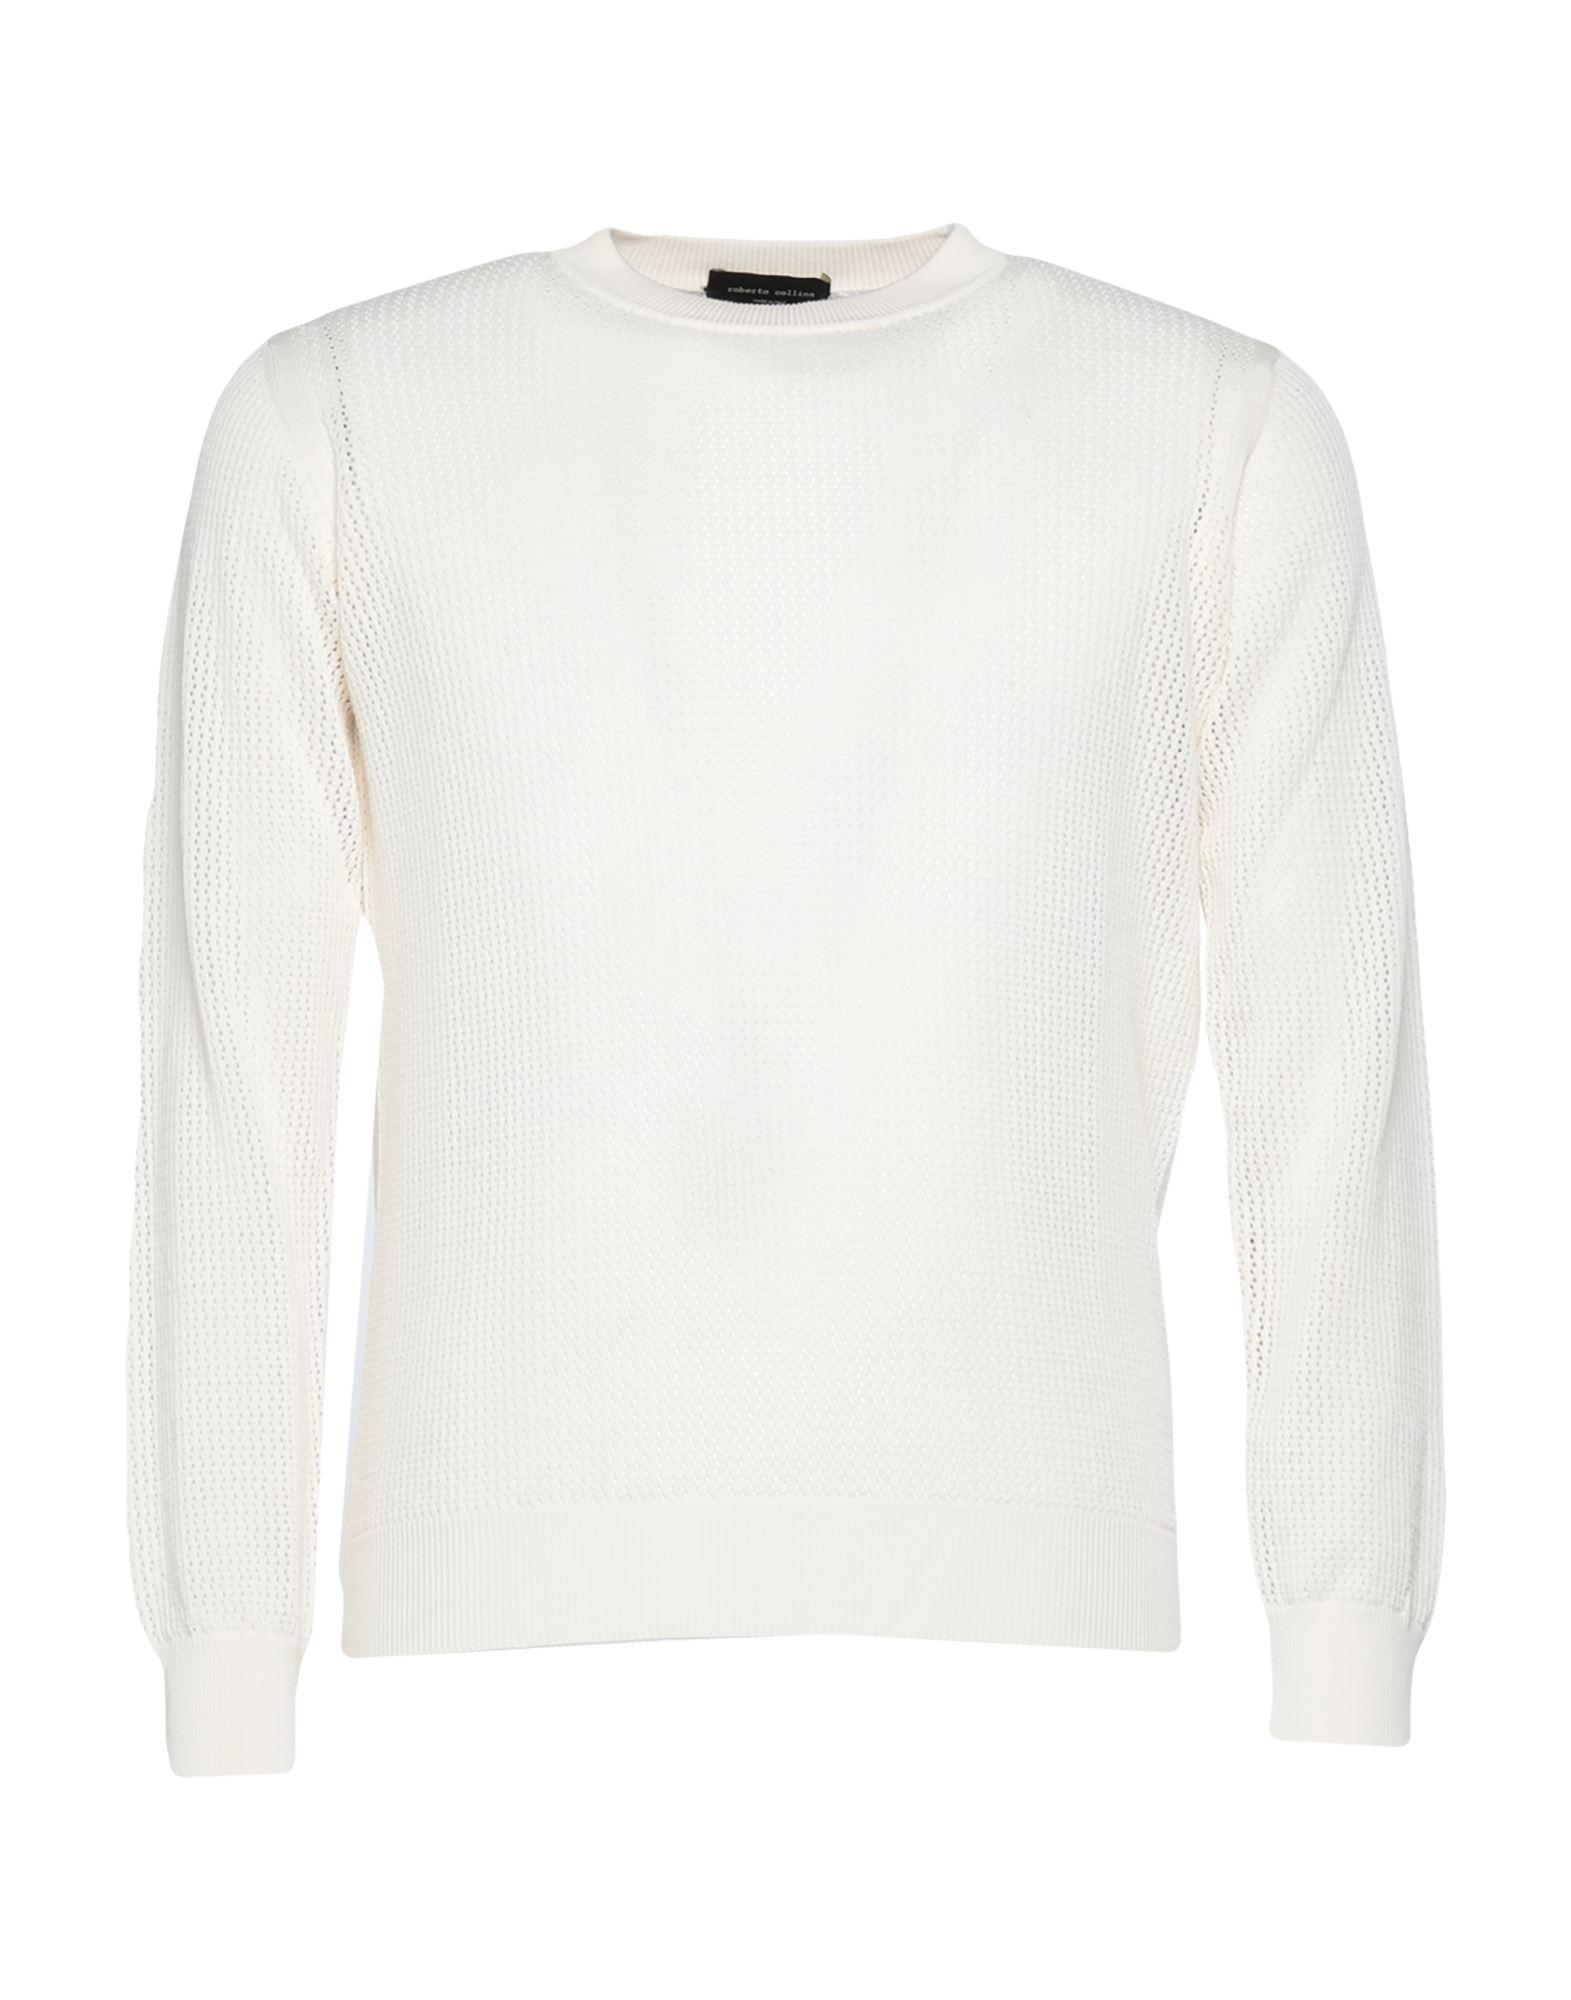 Womens Clothing Jumpers and knitwear Jumpers Roberto Collina Crew-neck Wool Jumper in White 